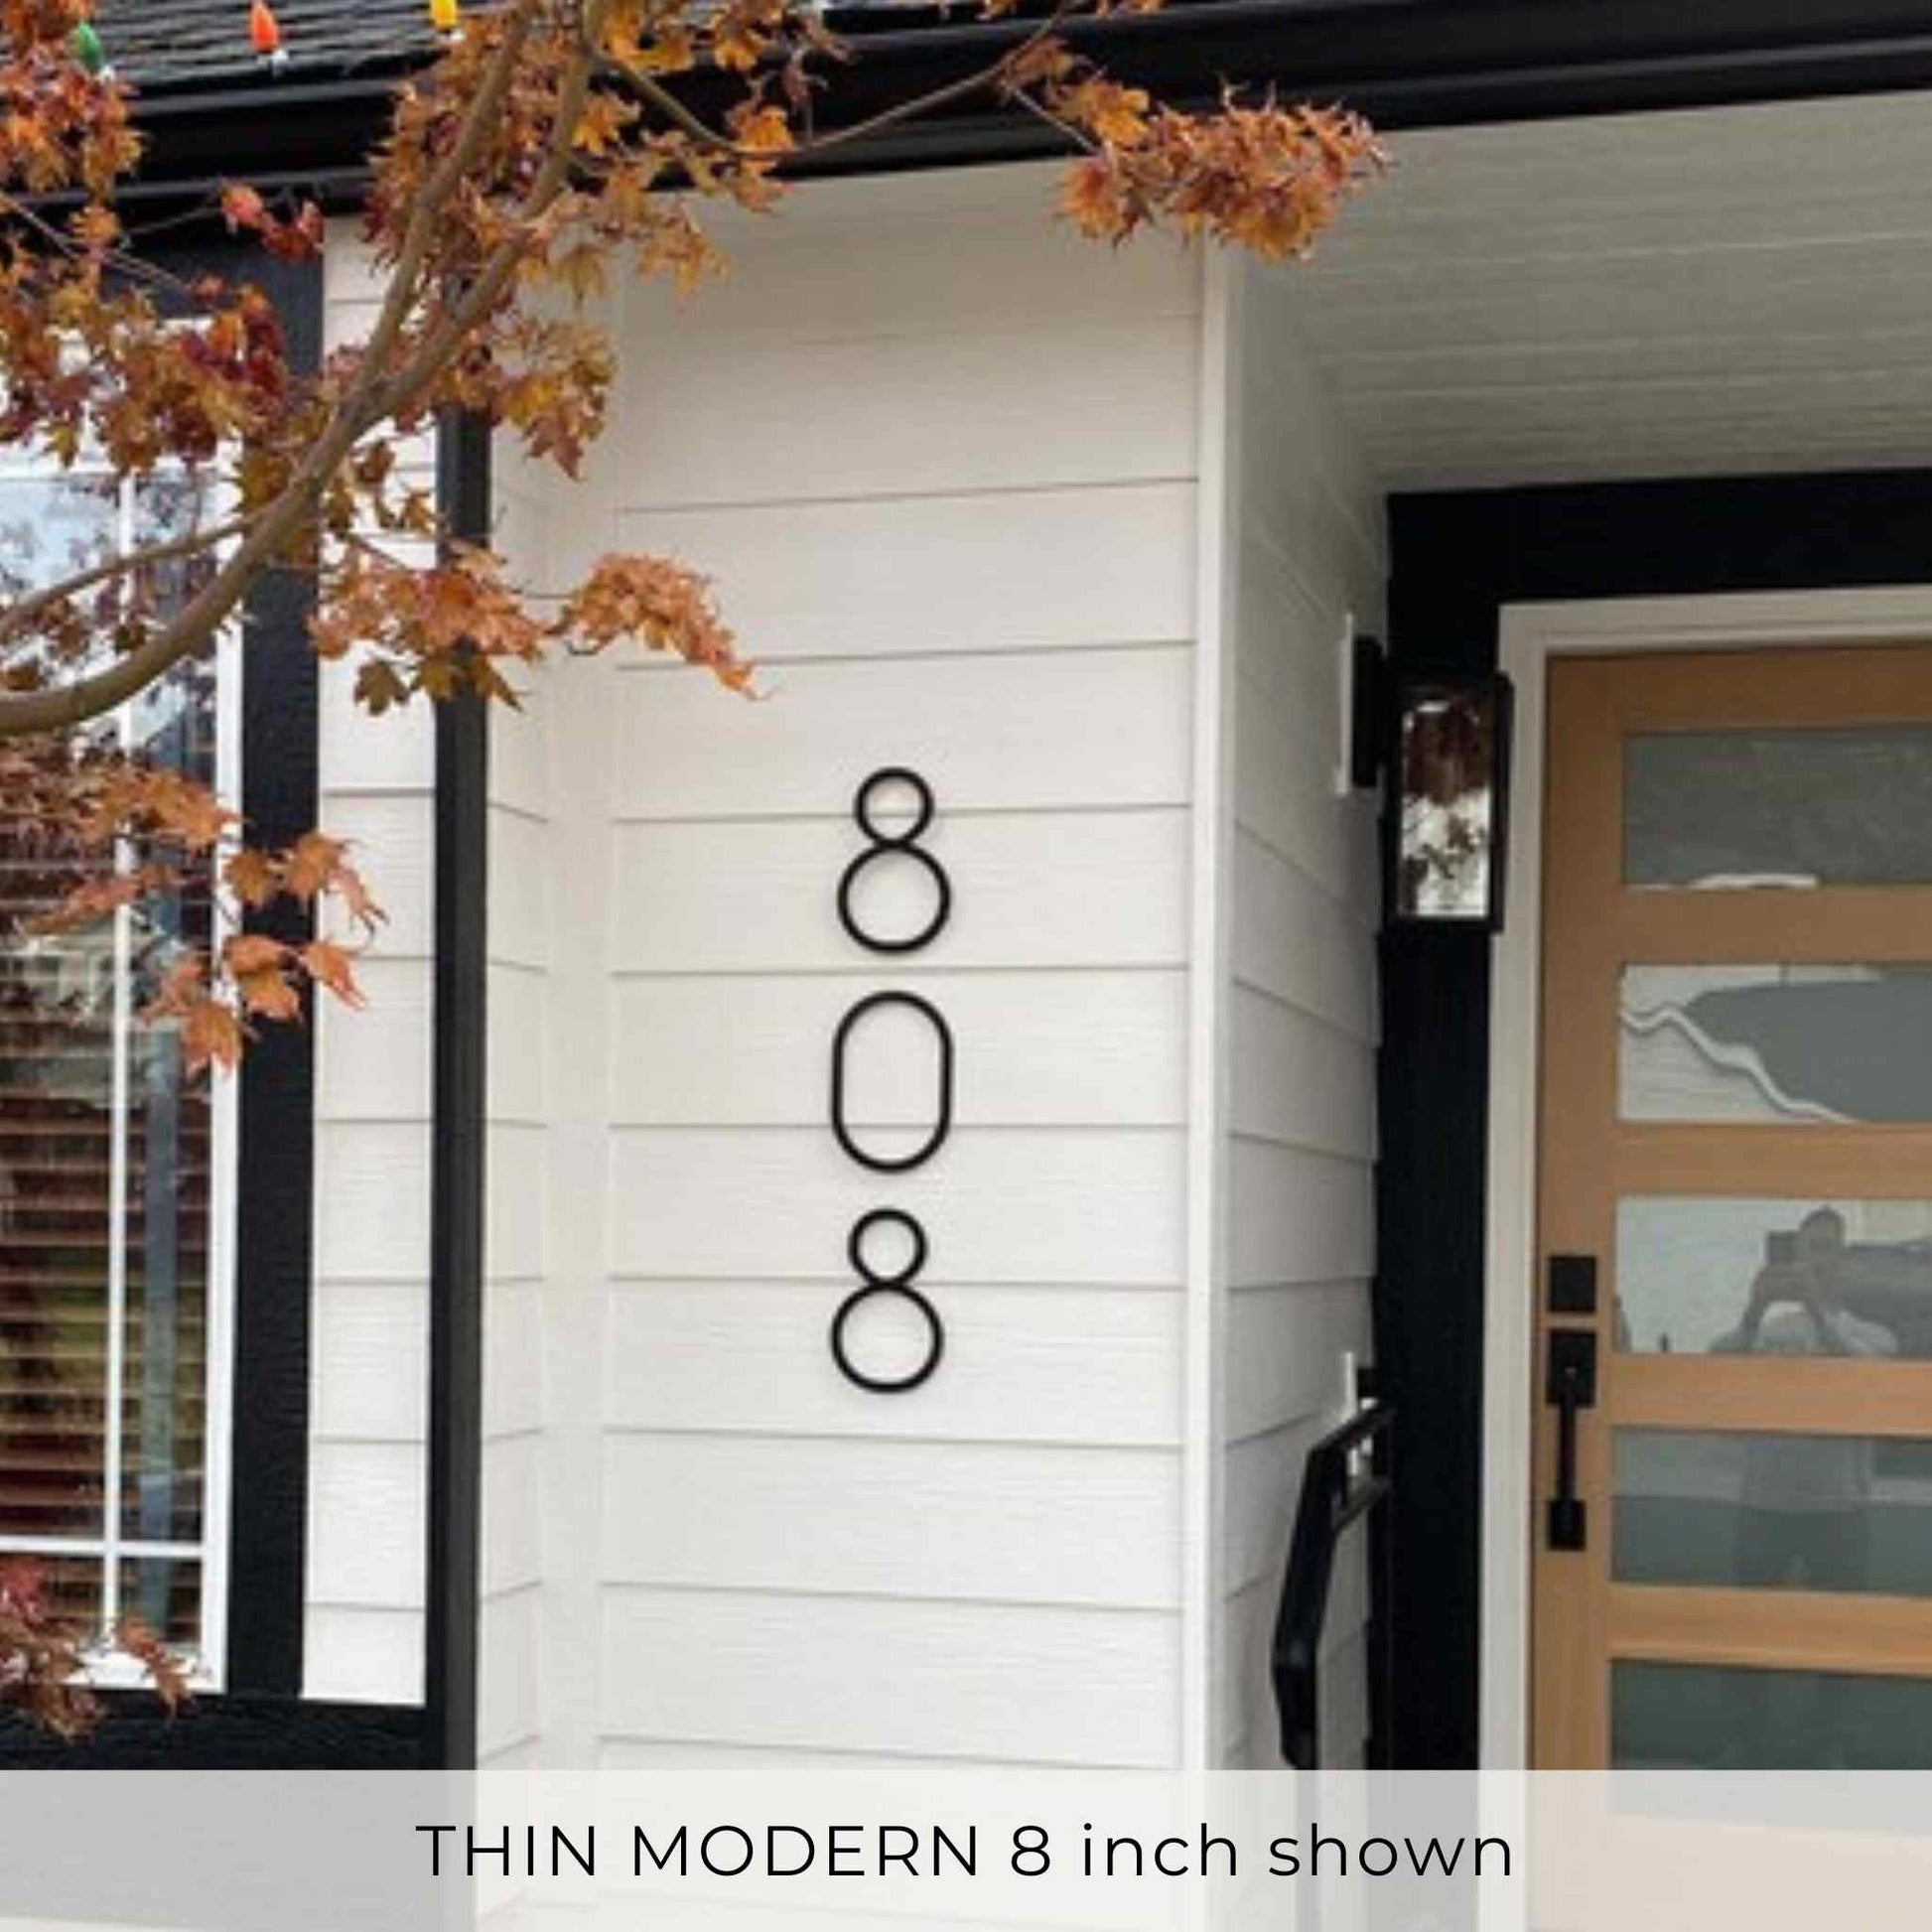 THIN MODERN house numbers and letters 